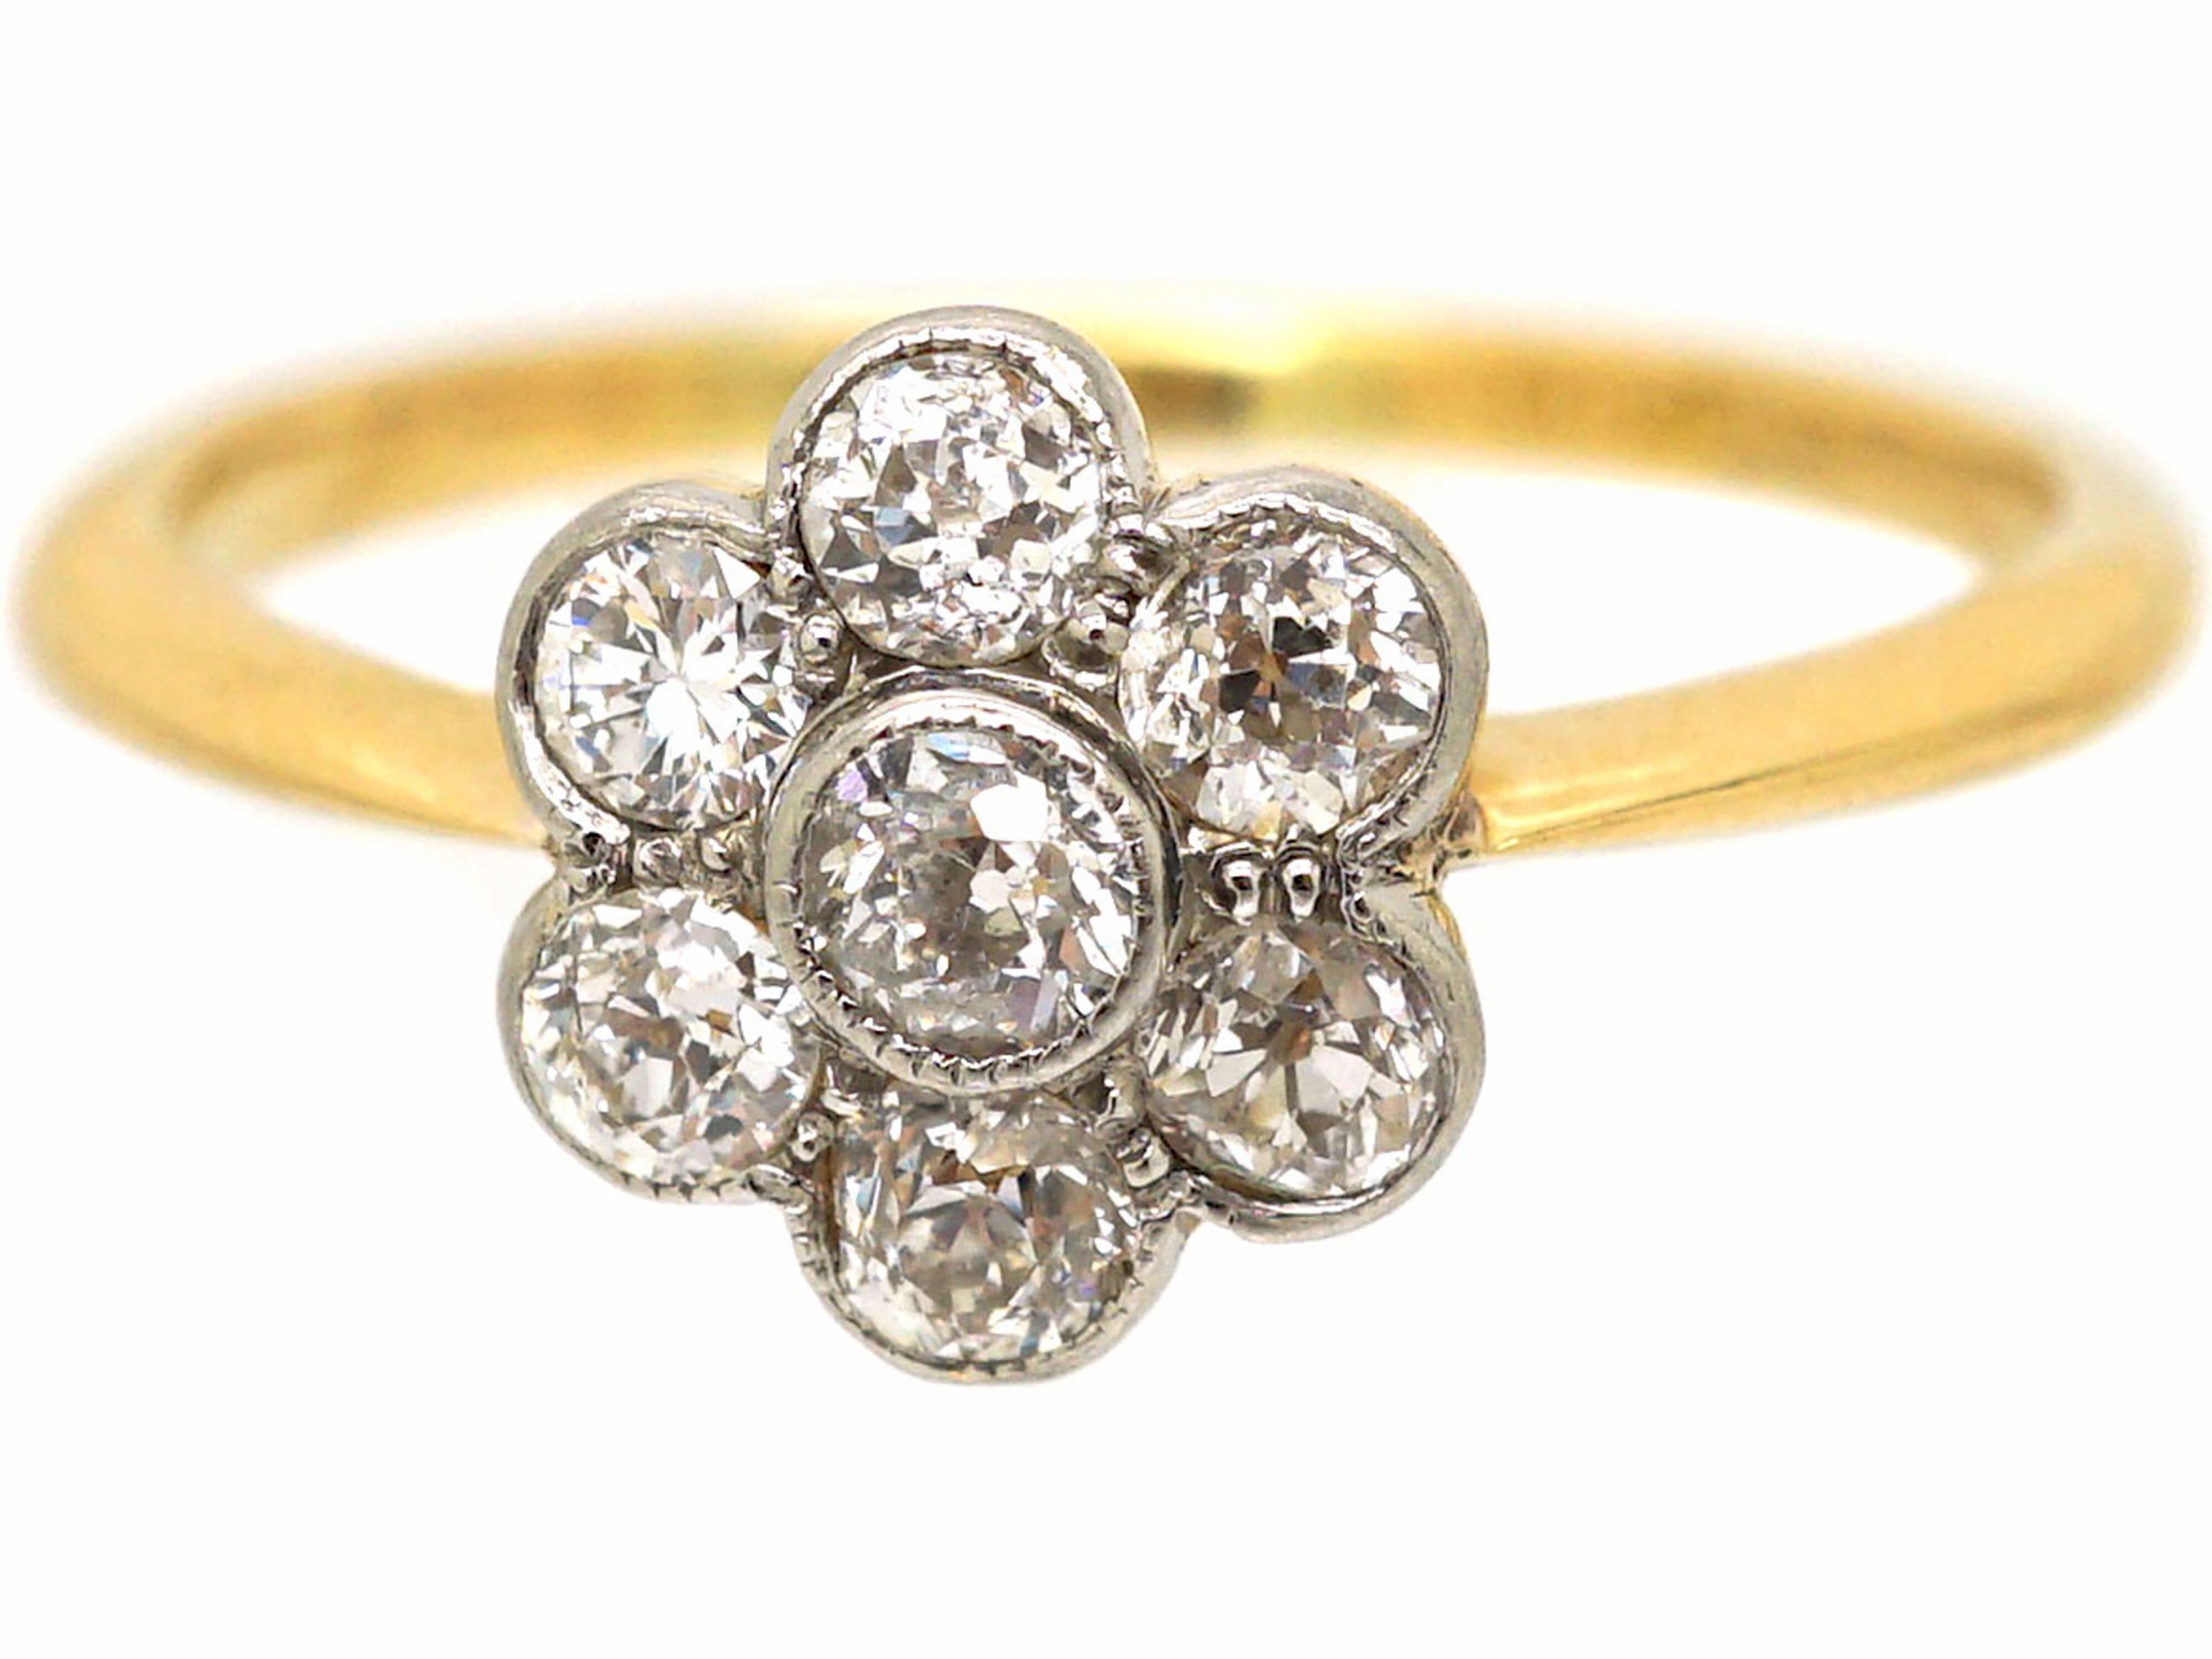 Edwardian 18ct Gold & Platinum Daisy Cluster Diamond Ring (292T) | The ...